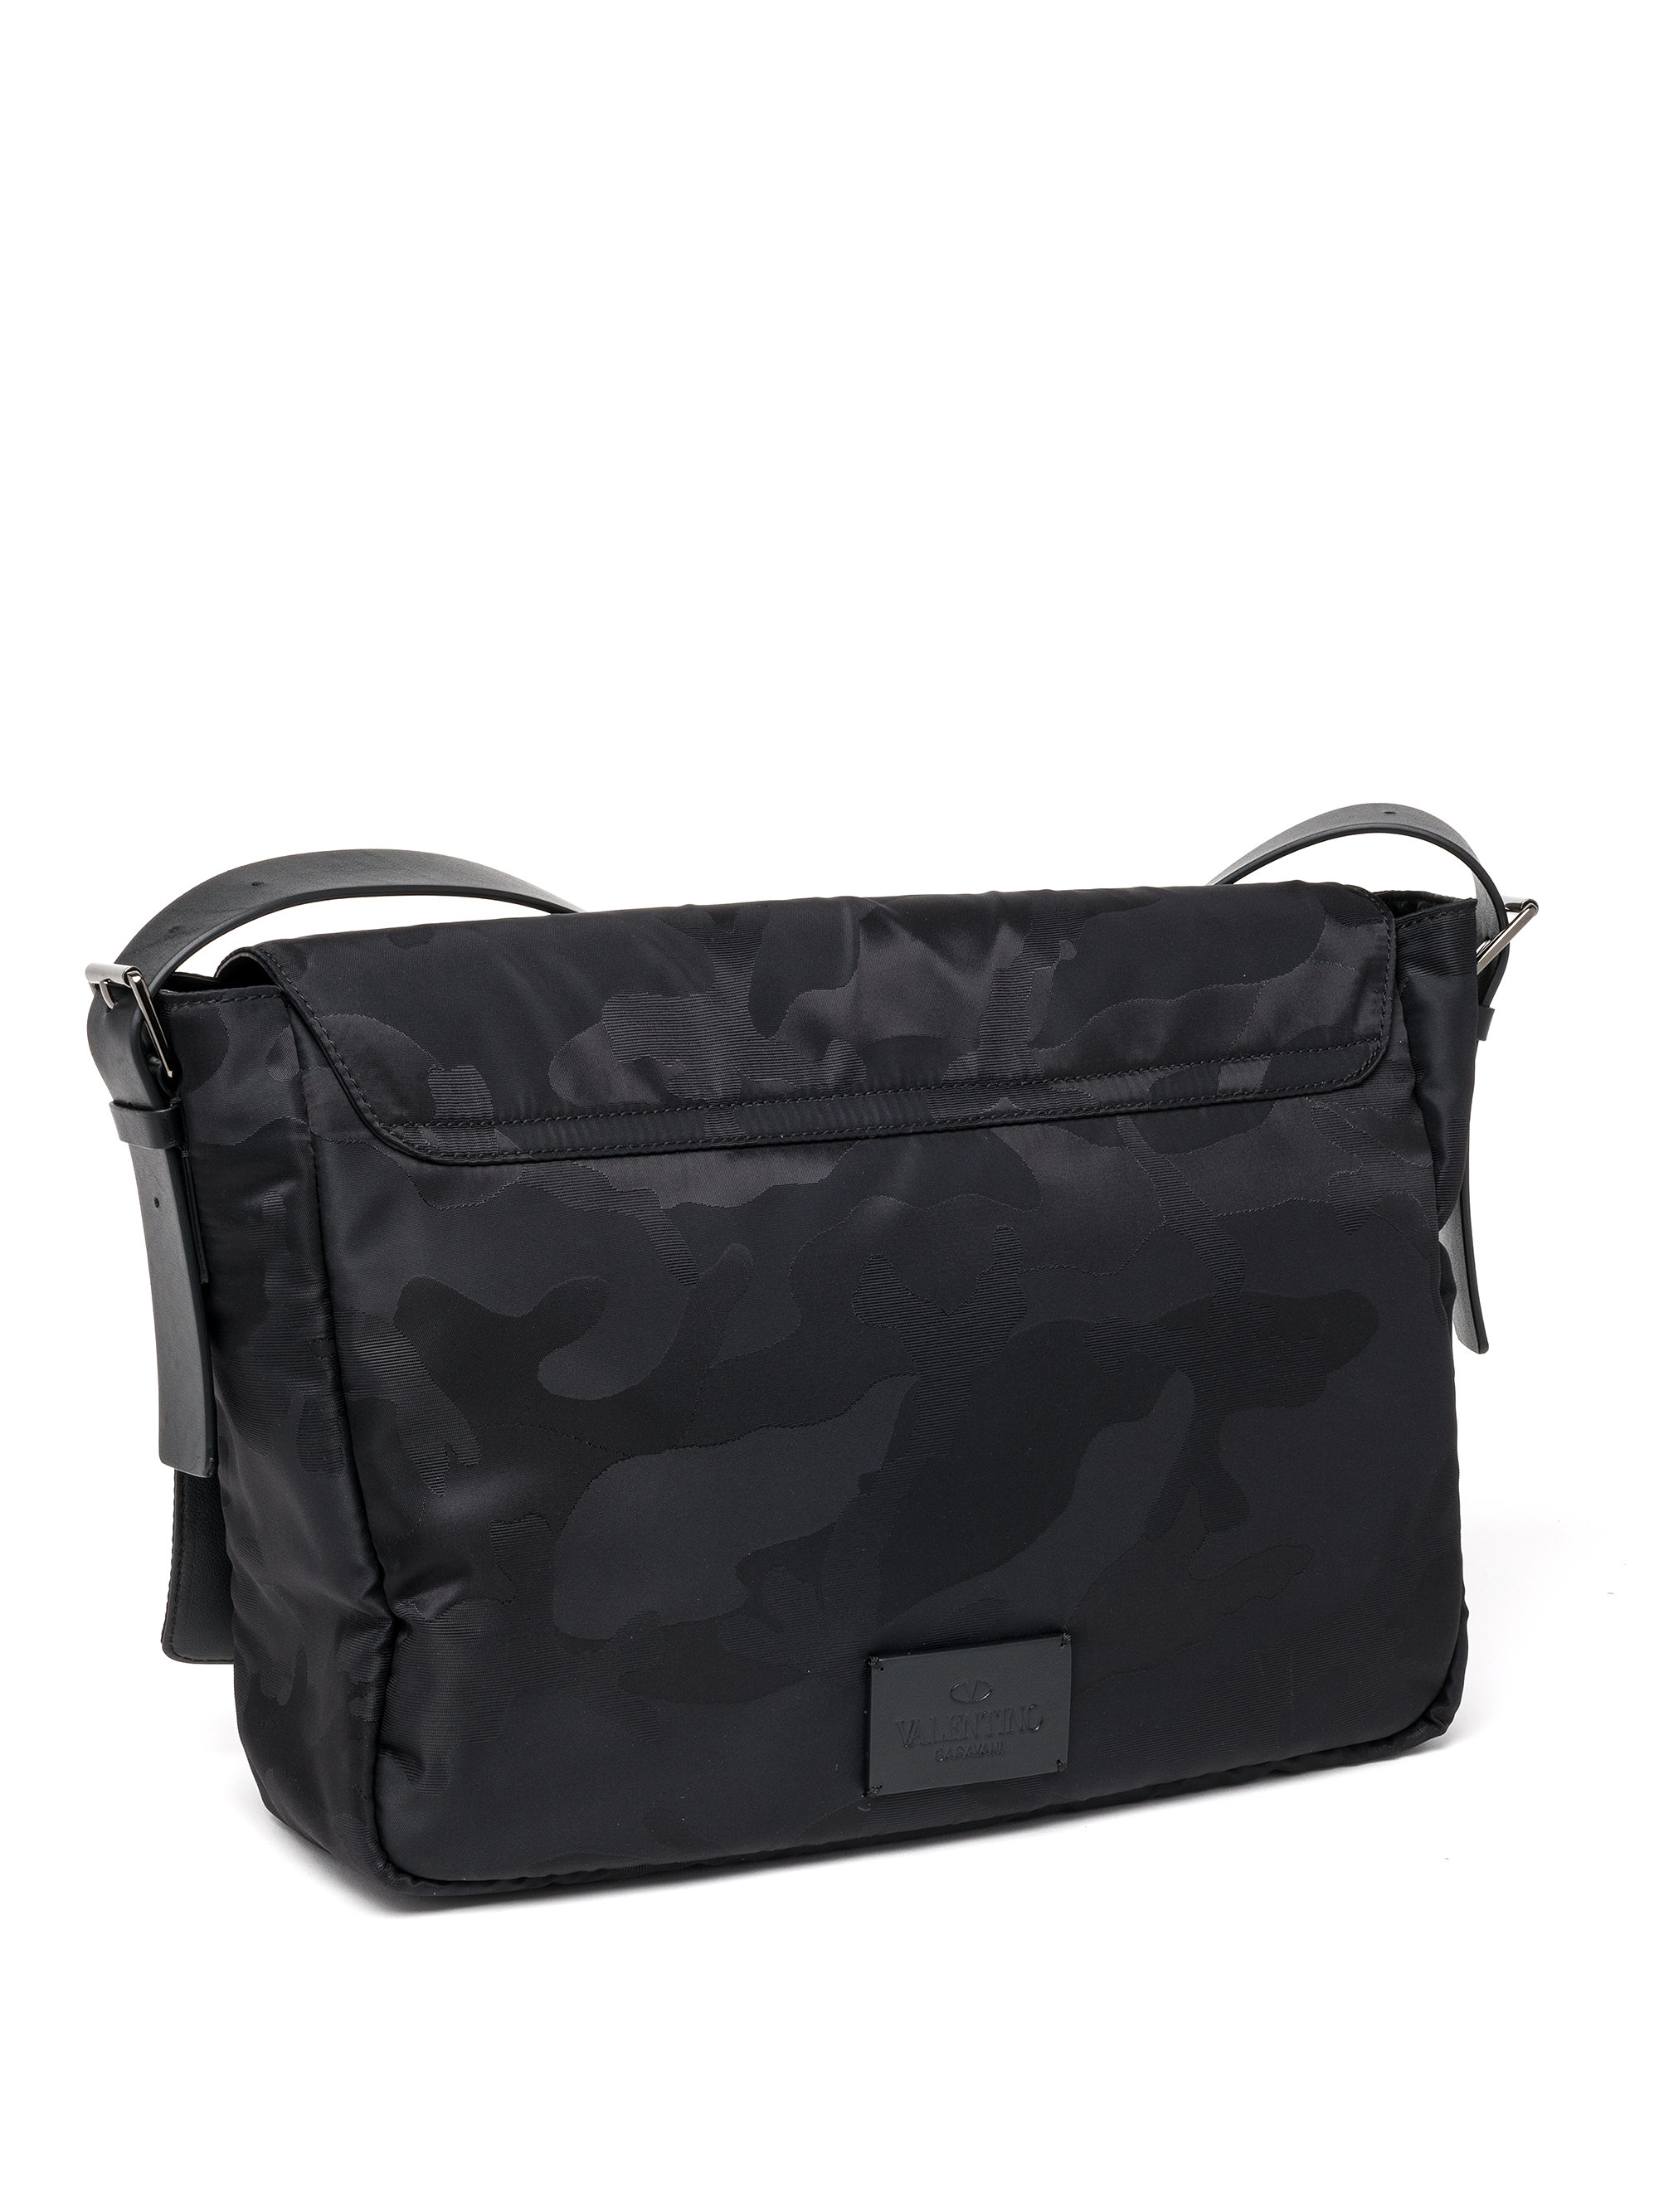 Valentino Leather Trim Camo Messenger Bag In Black Army Black For Men Lyst